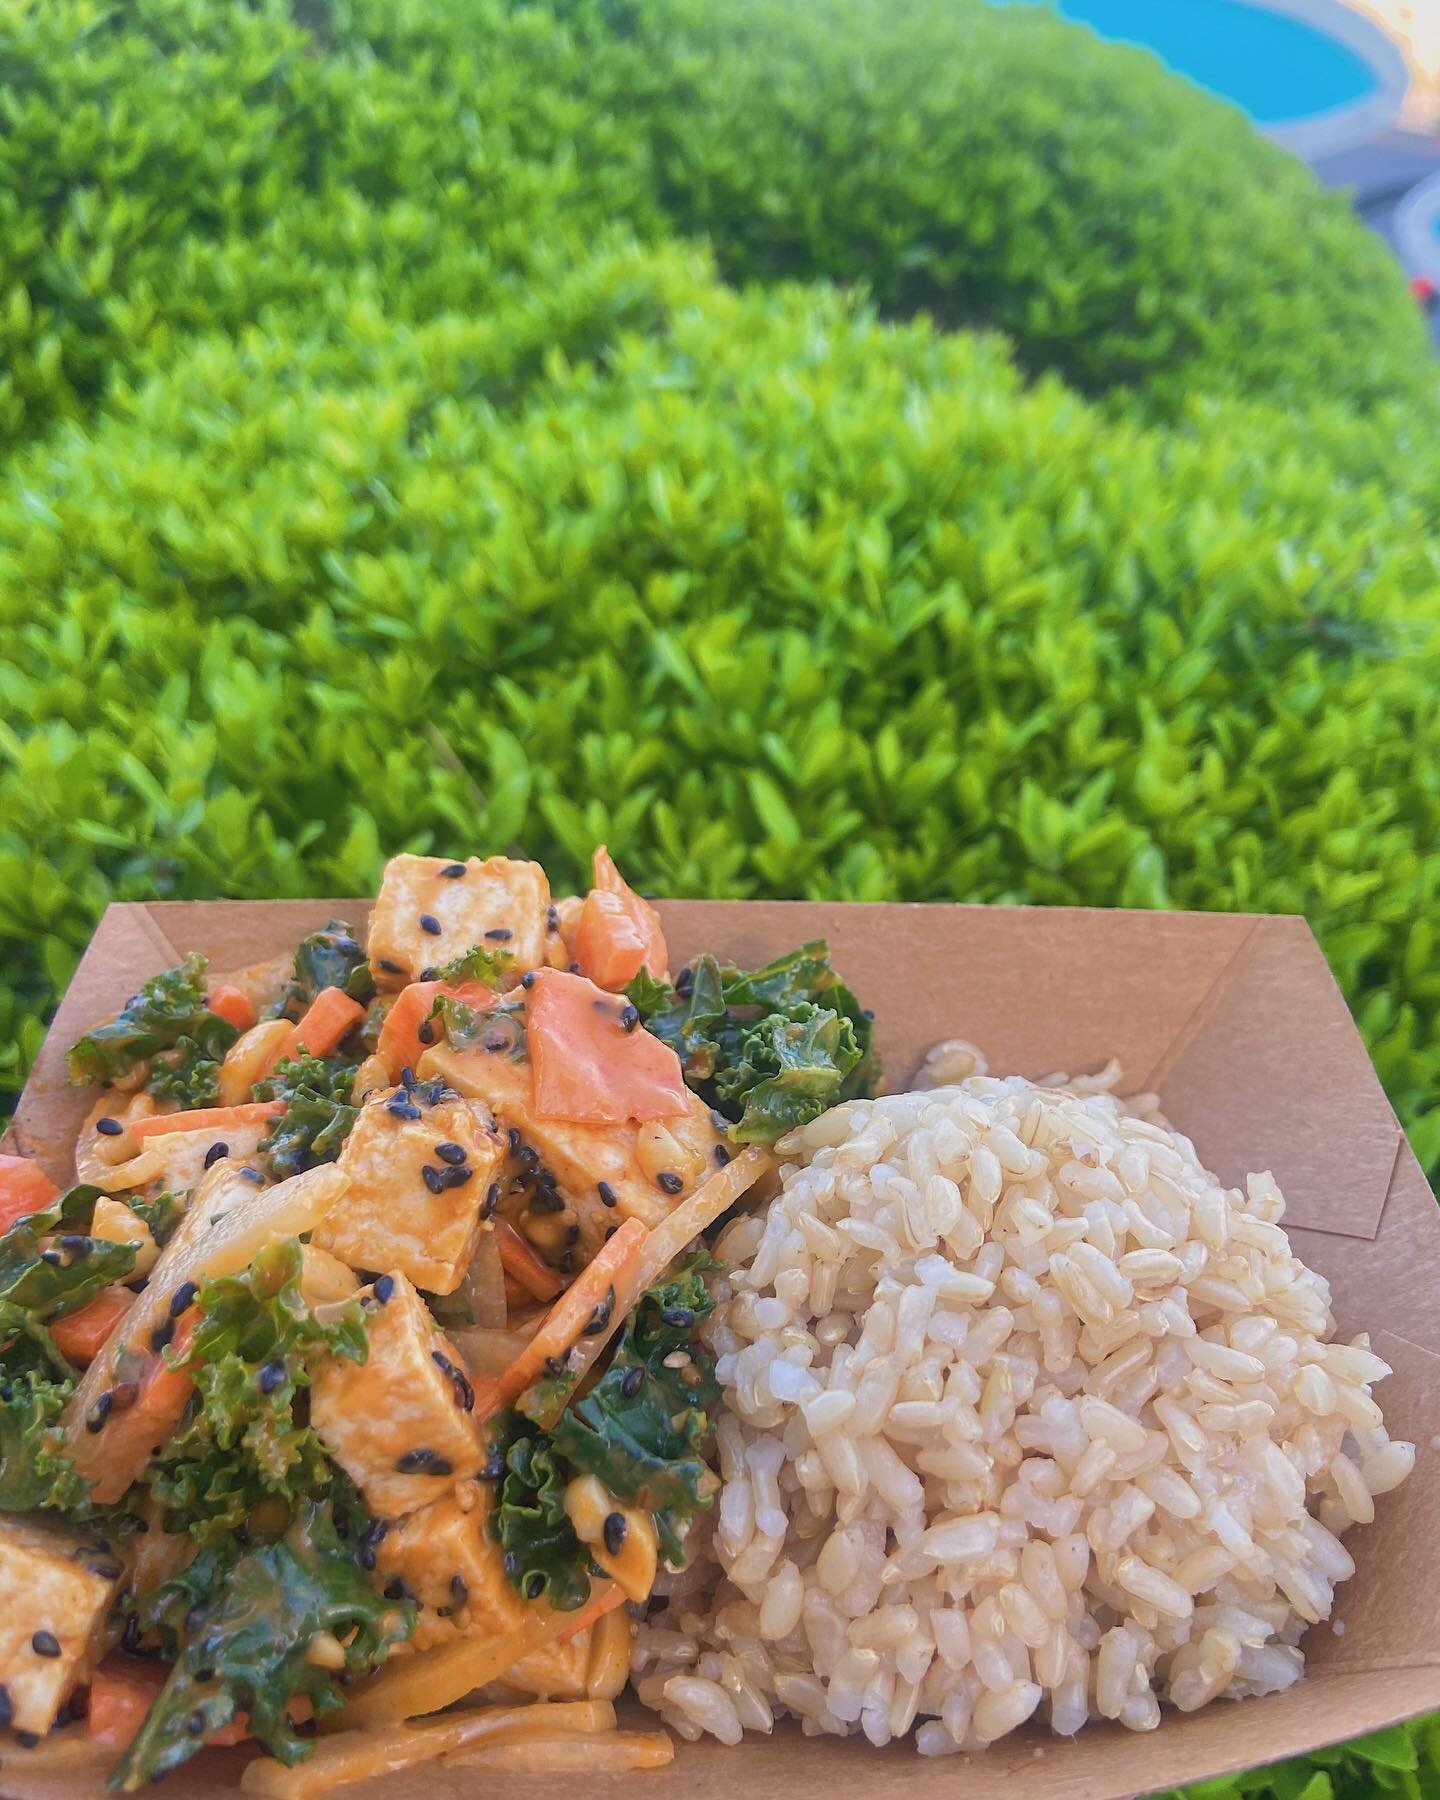 😋 Pad Thai 😋

Need a fish alternative?

Pressed tofu tossed with a house-made peanut sauce, kale, carrot, peanuts, white &amp; green onions and sesame seeds😇